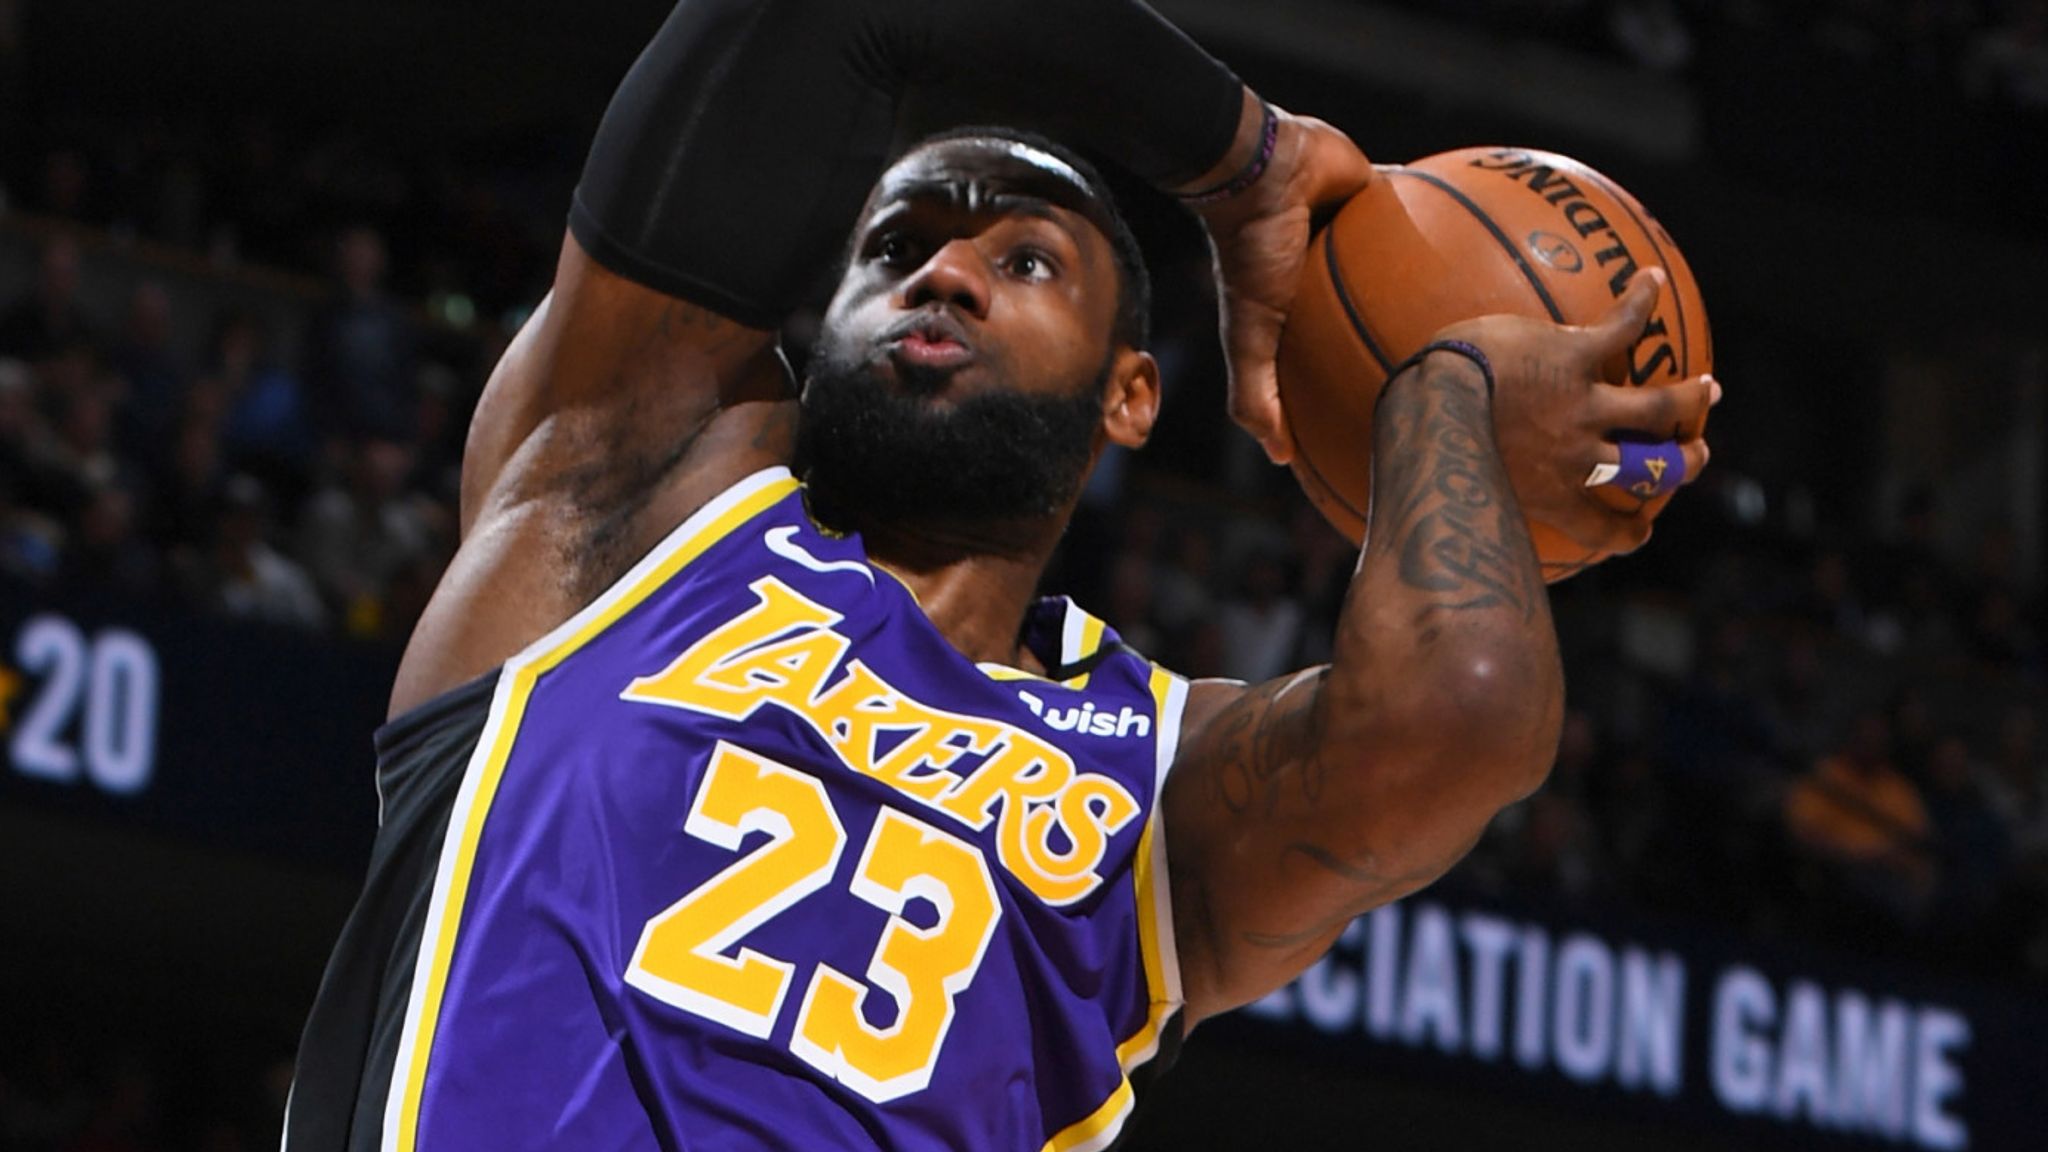 Lakers 119, Wizards 117 - LeBron's 4th straight 30-point game carries Lakers  to win 